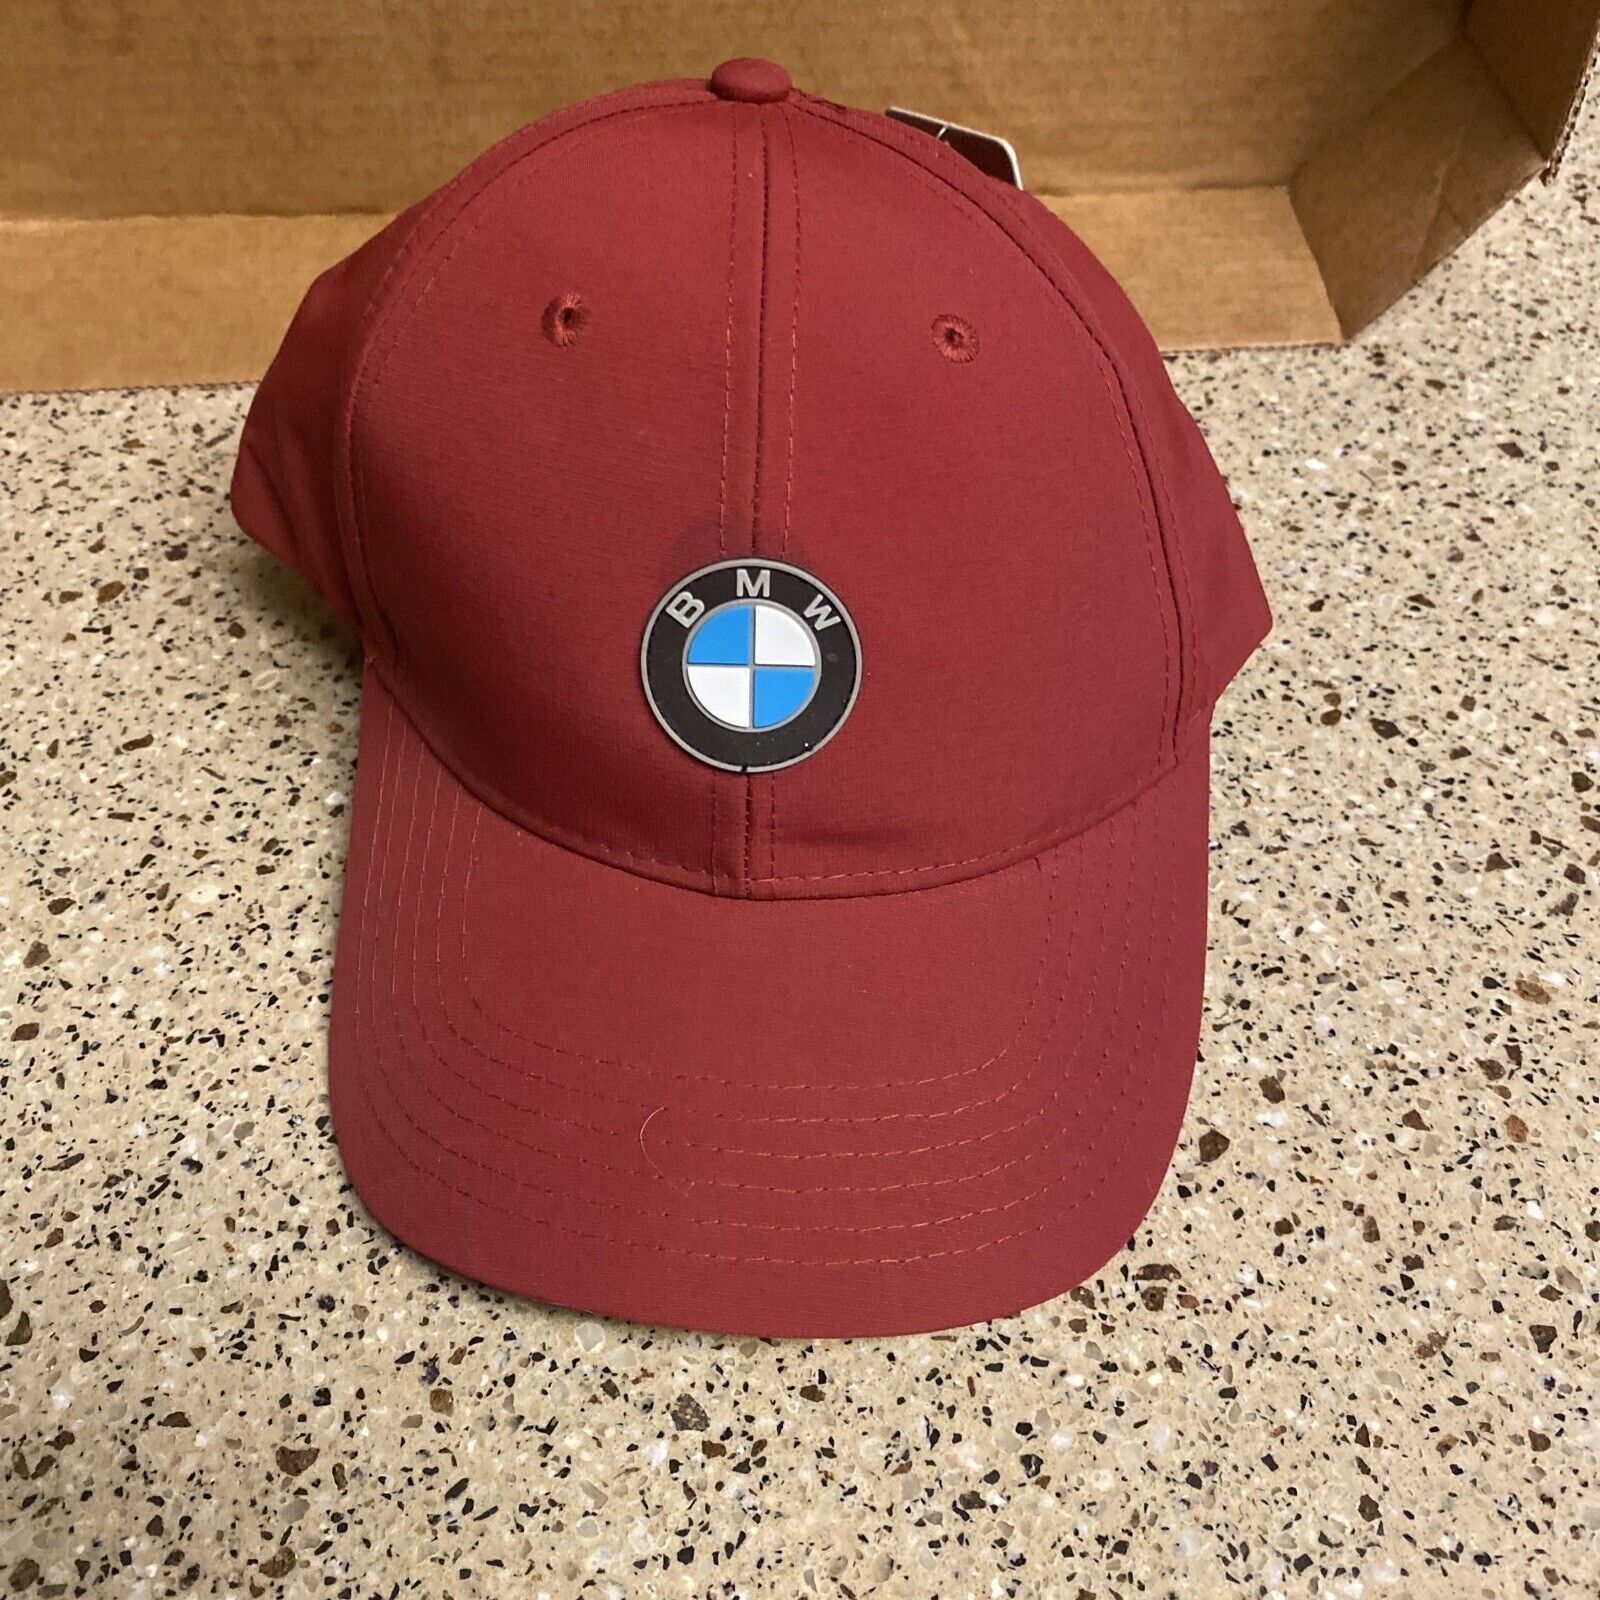 Bmw The Ultimate Driving Machine Adjustable Strap Red Cap Hat New With Tags